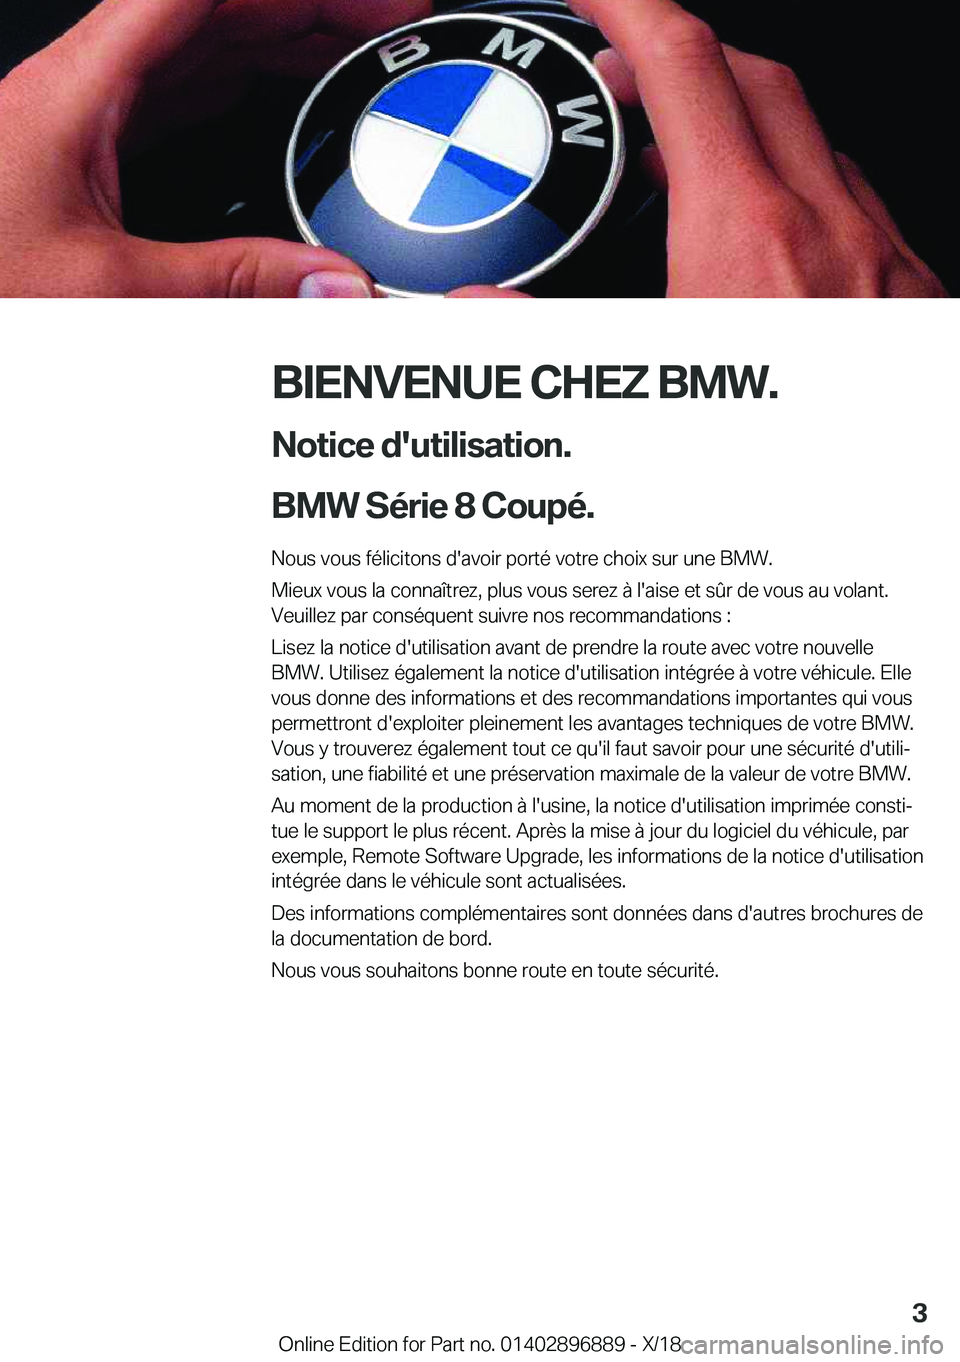 BMW 8 SERIES COUPE 2019  Notices Demploi (in French) �B�I�E�N�V�E�N�U�E��C�H�E�Z��B�M�W�.�N�o�t�i�c�e��d�'�u�t�i�l�i�s�a�t�i�o�n�.
�B�M�W��S�é�r�i�e��8��C�o�u�p�é�.
�N�o�u�s��v�o�u�s��f�é�l�i�c�i�t�o�n�s��d�'�a�v�o�i�r��p�o�r�t�é�